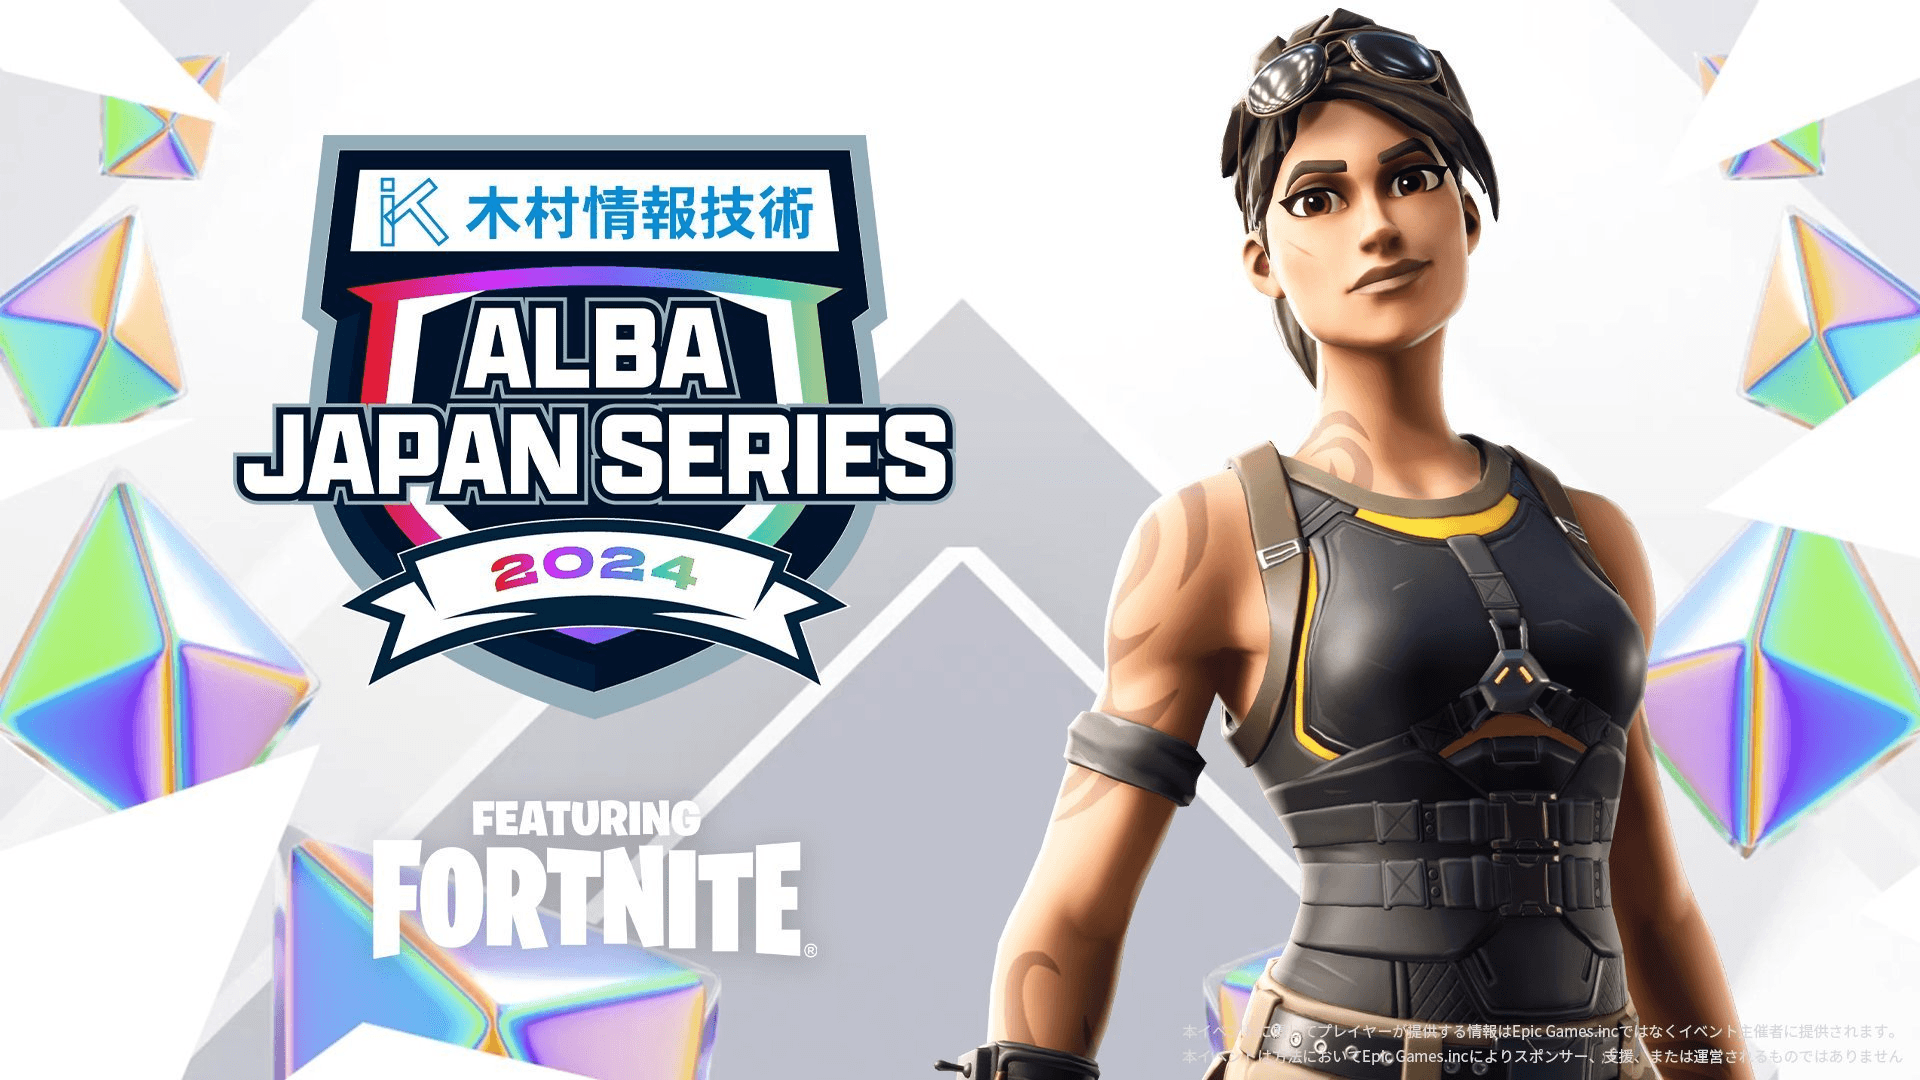  ALBA JAPAN SERIES featuring Fortnite #10 feature image